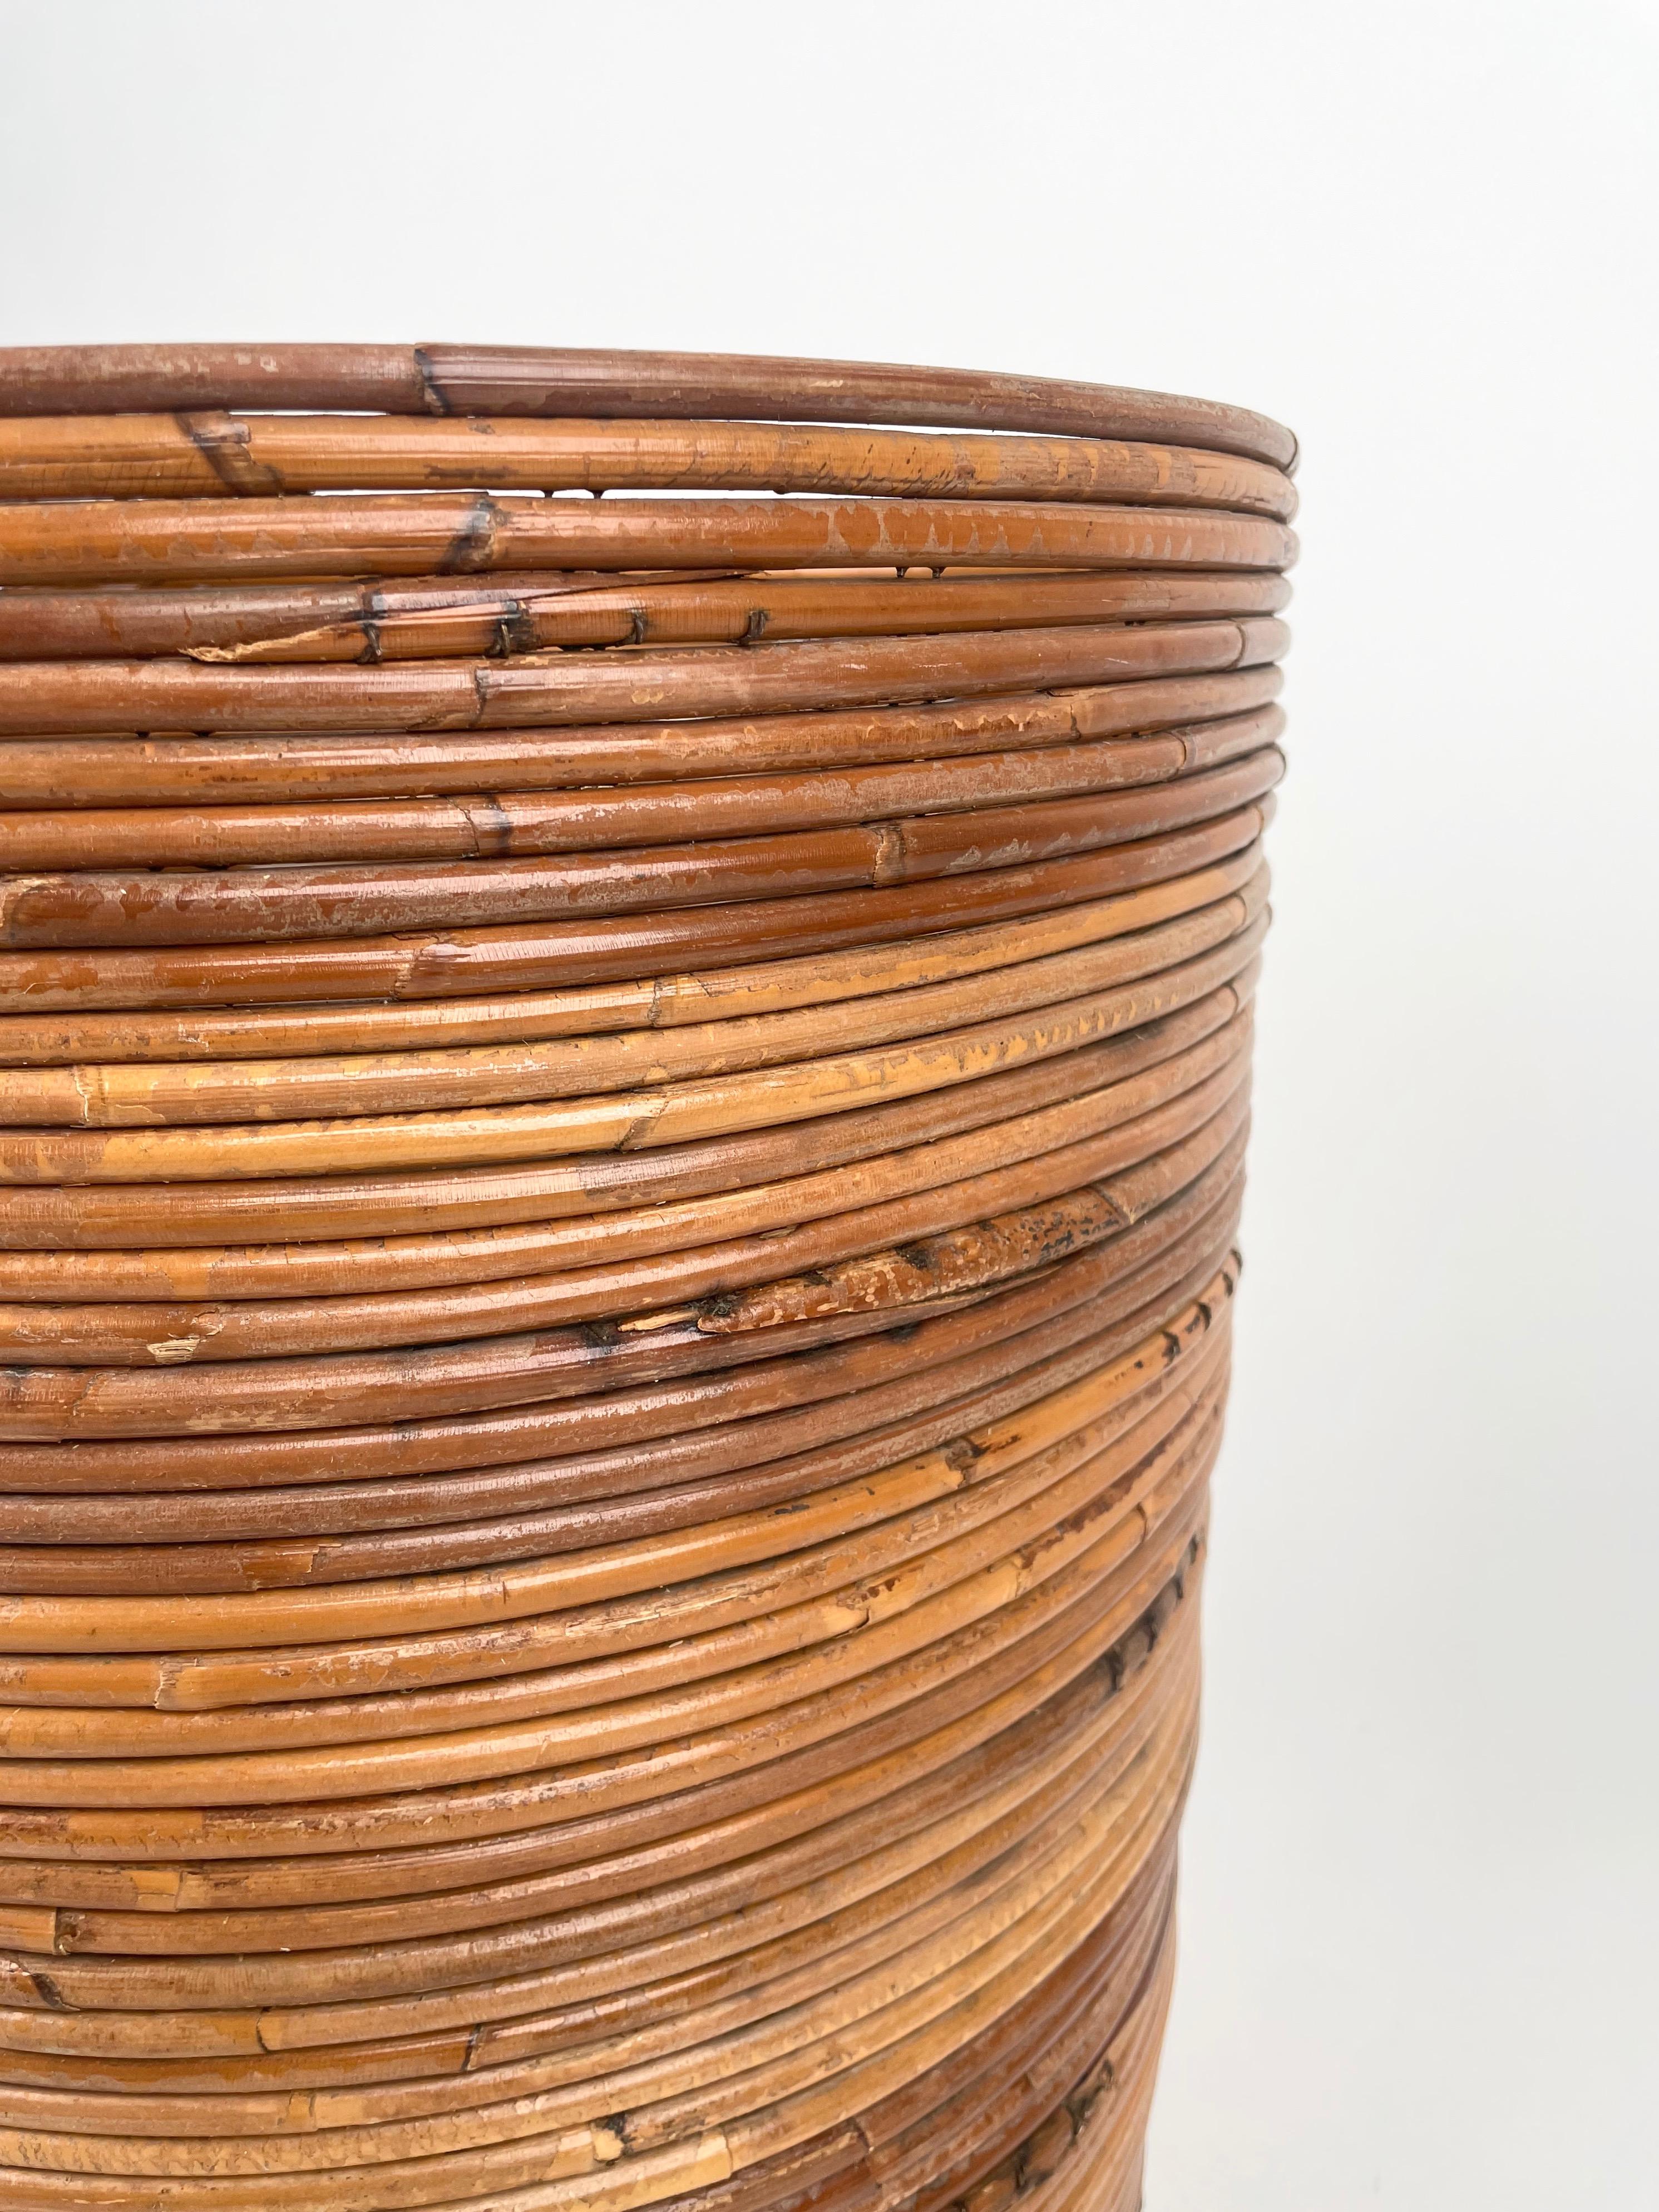 Rattan and Bamboo Round Basket Plant Holder Vase, Italy, 1960s For Sale 6